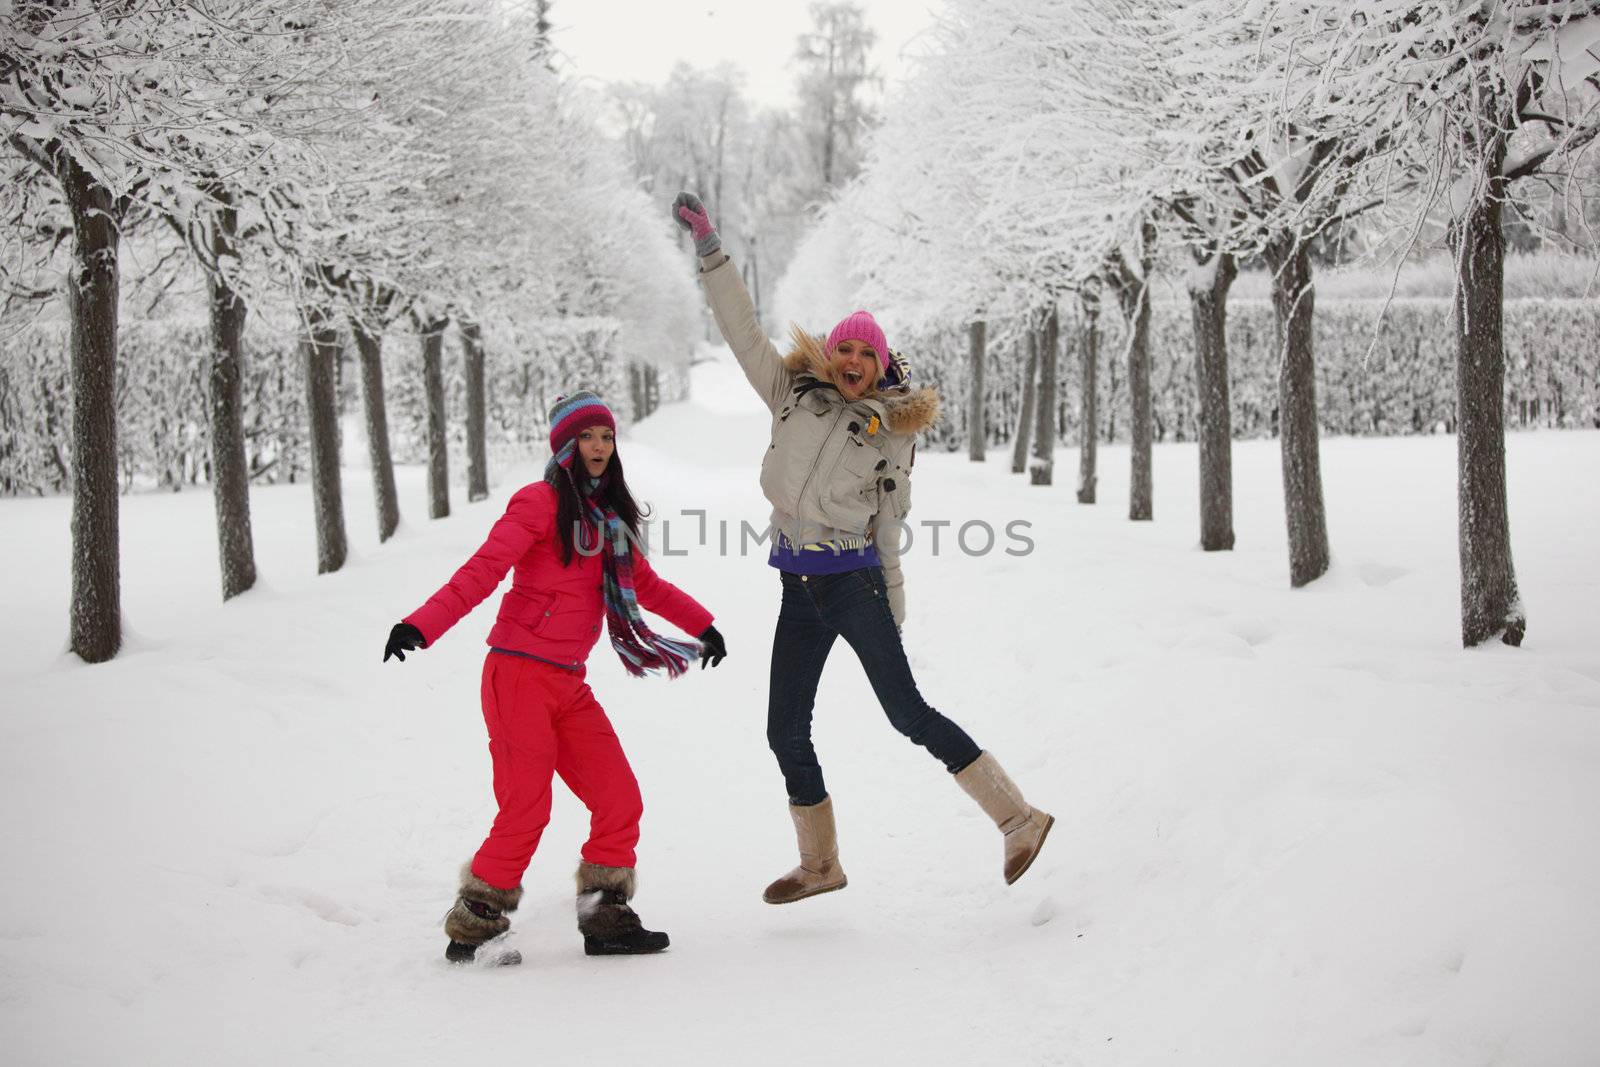 two women walk by winter alley snow trees on background